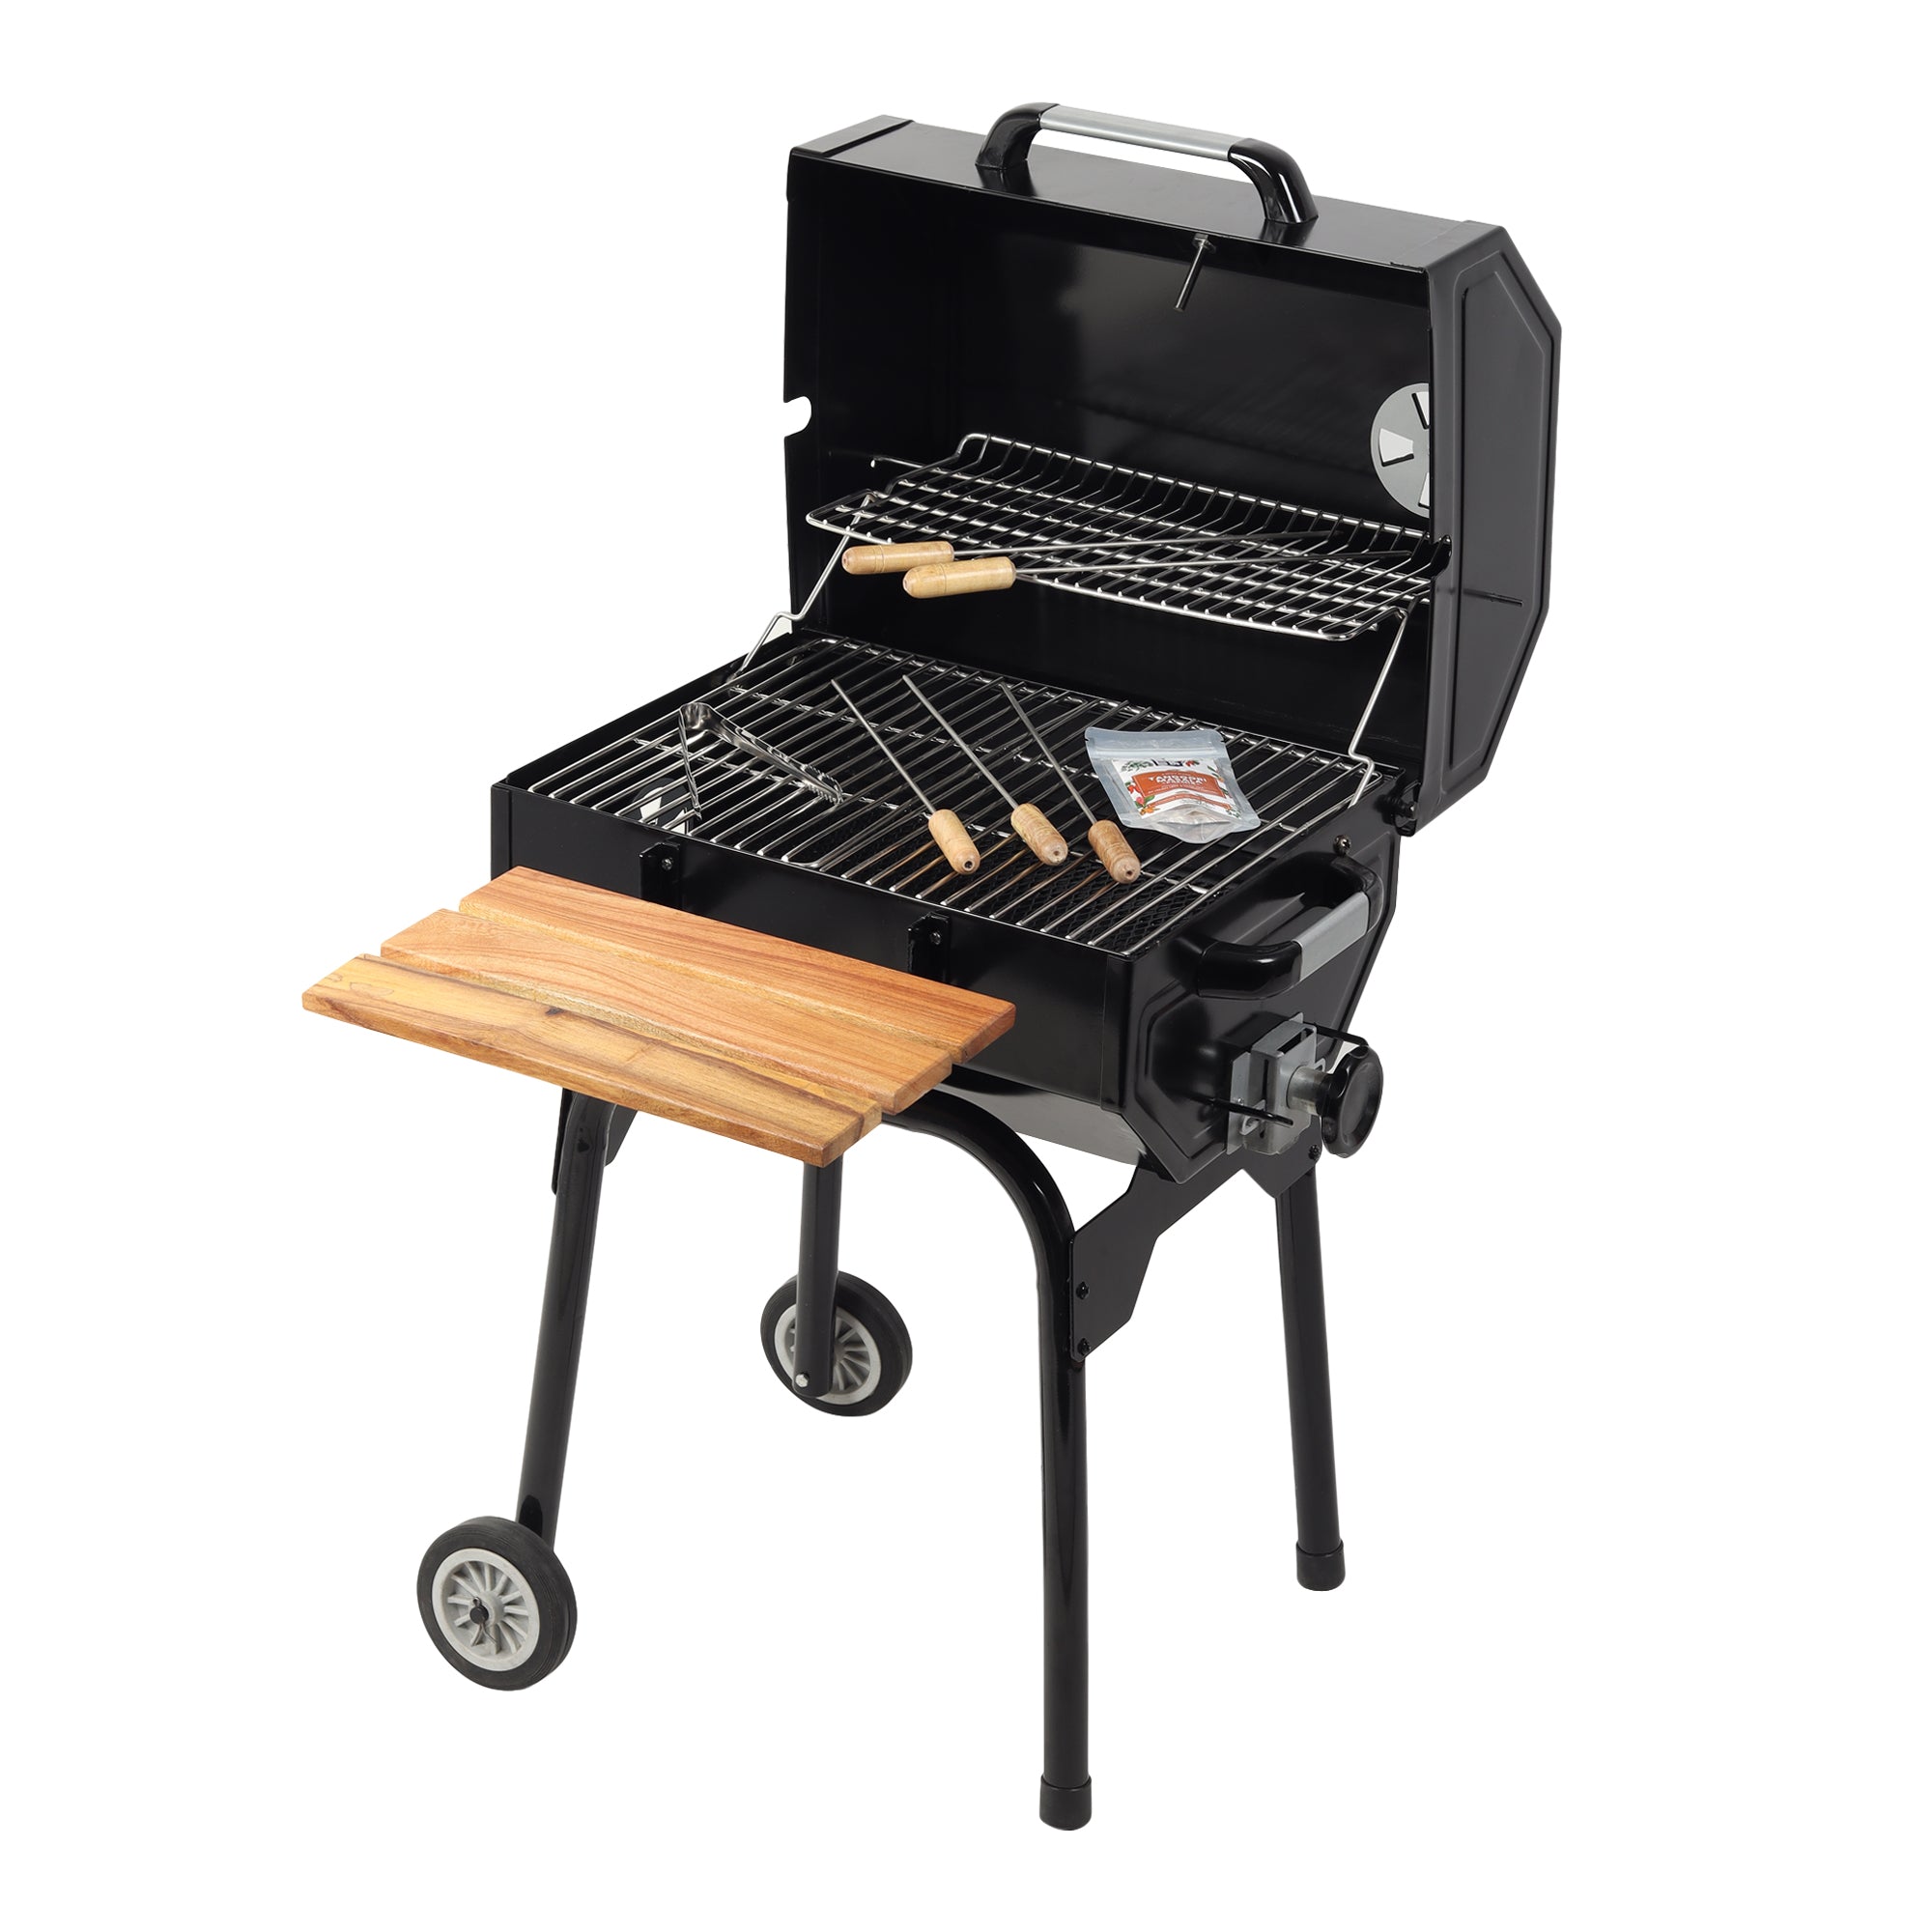 FlameMaster Pro Barbeque Grill set for Home | Large Cooking Area, Easy Assemble, Additional Warming Rack | Charcoal Griller BBQ With 5 Wooden Skewers, 1 Tong